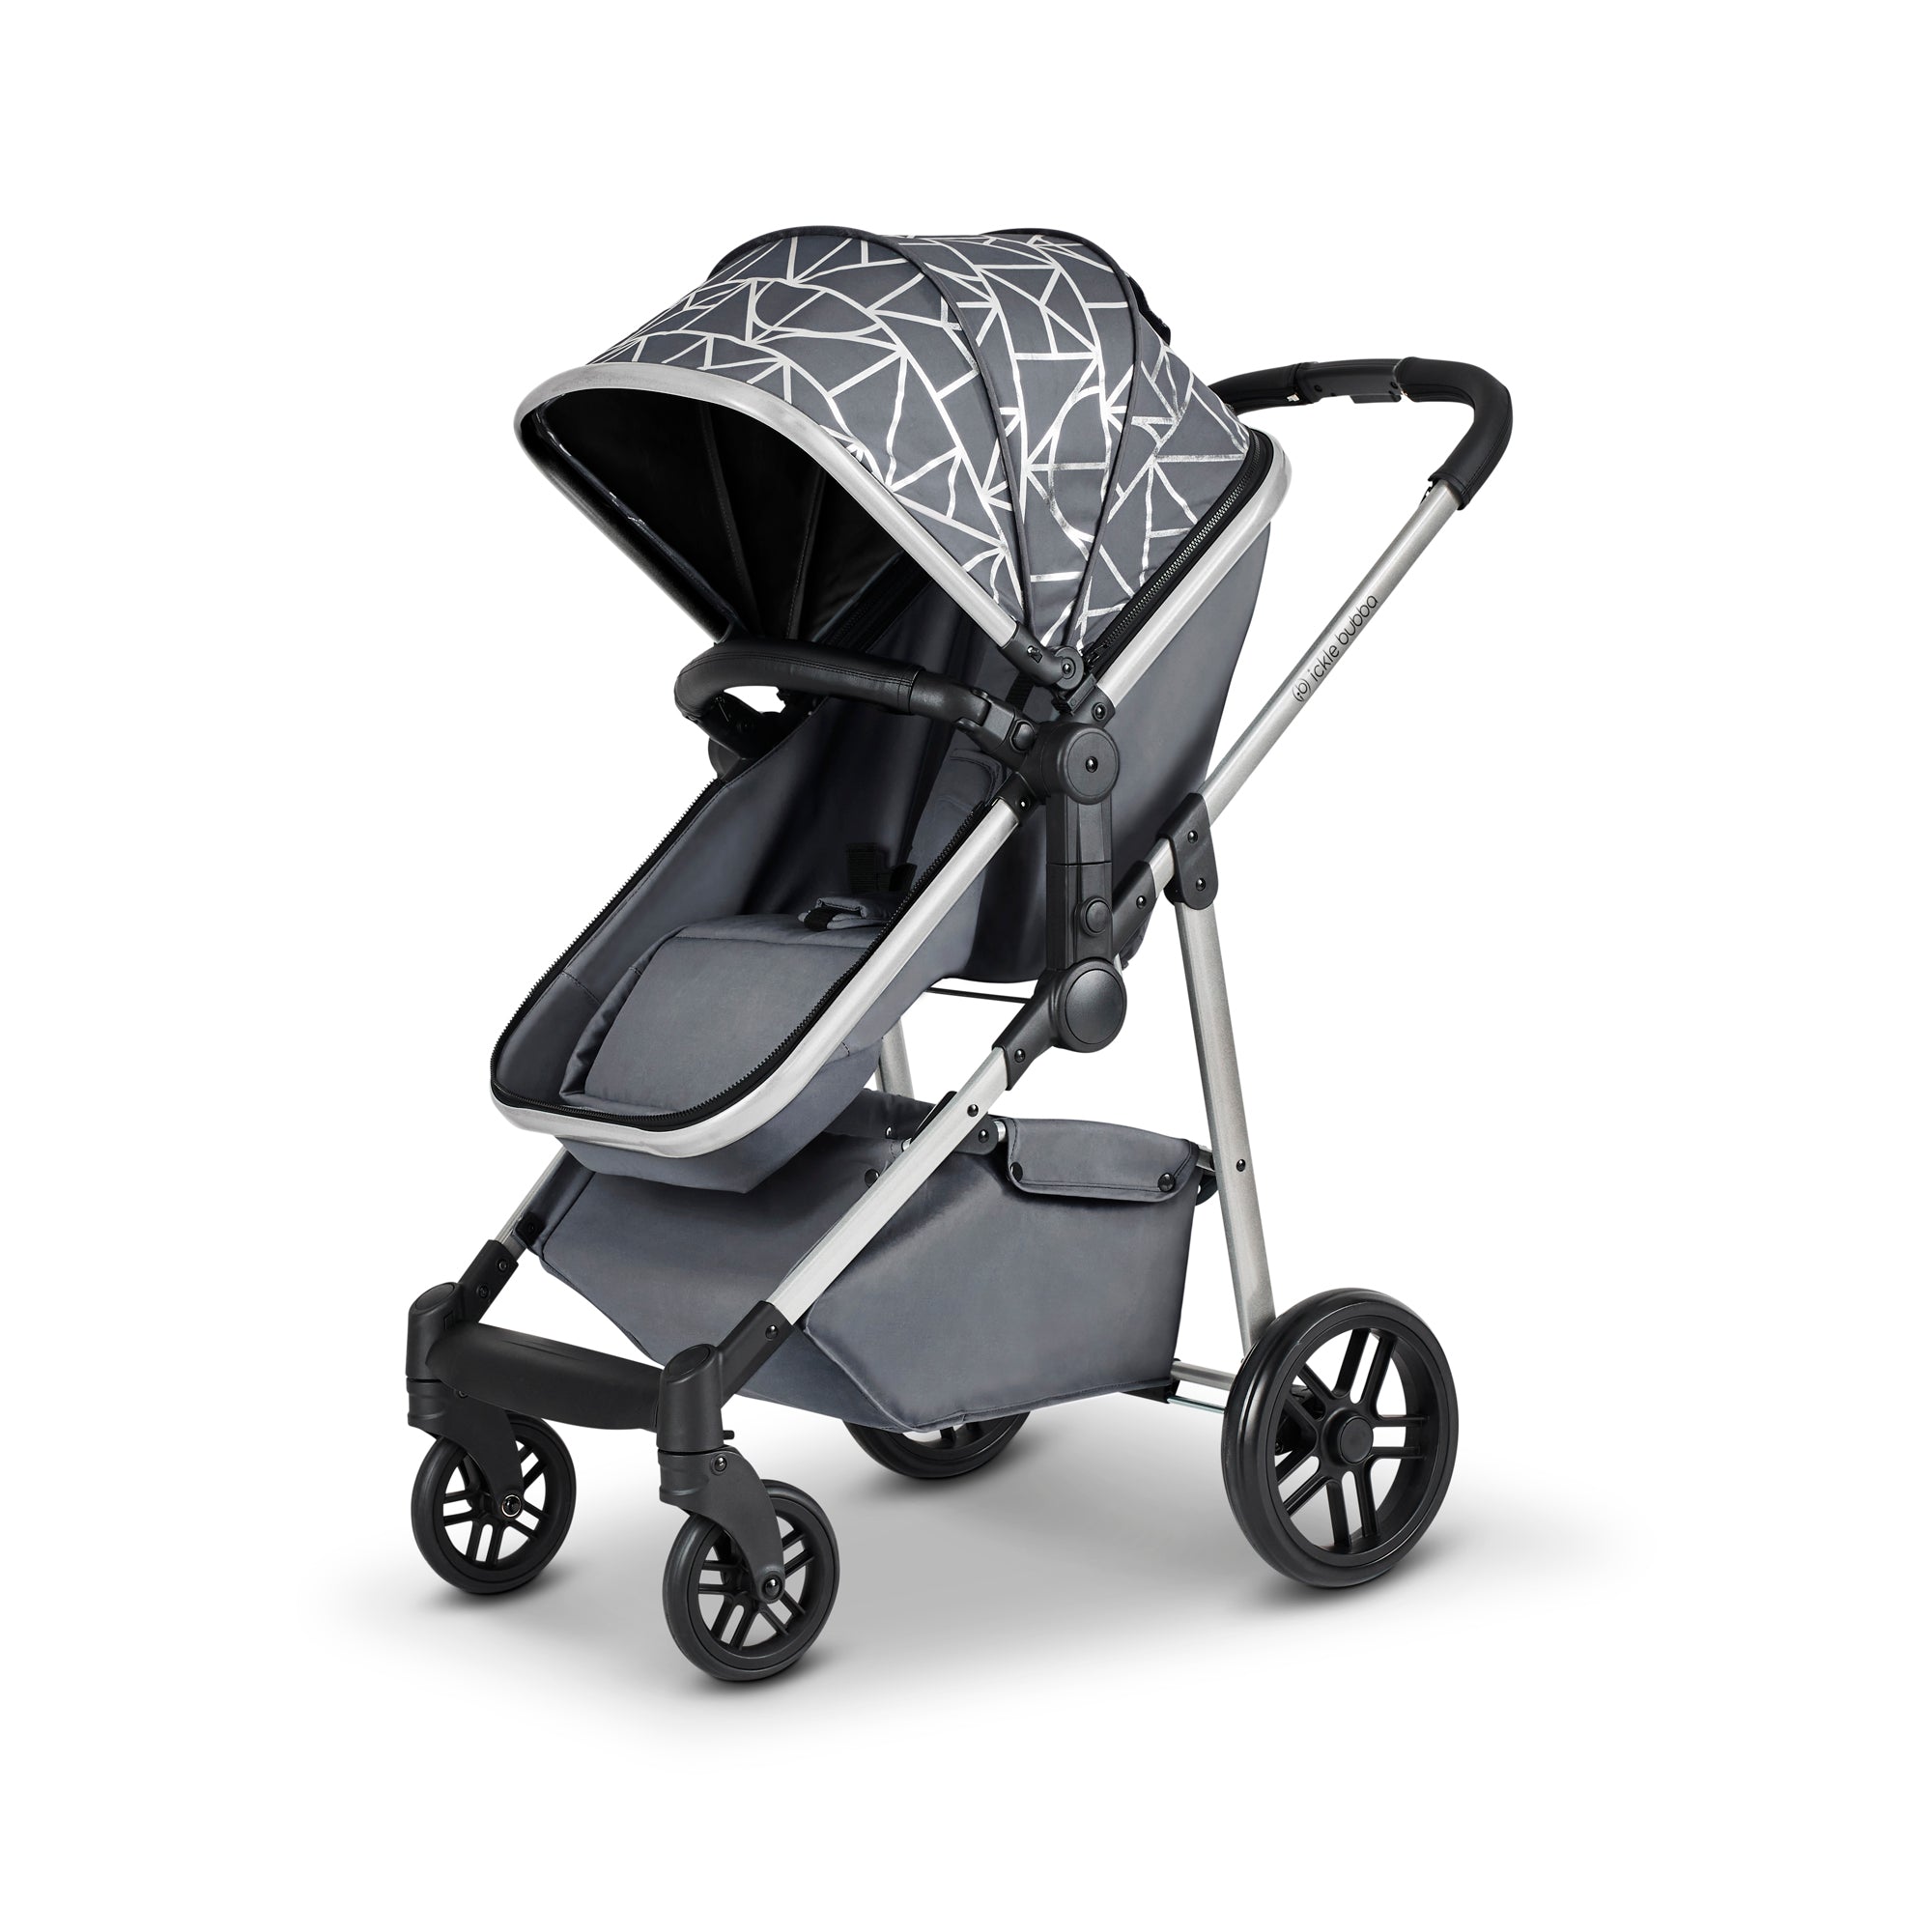 Zira 3-in-1 Travel System with Astral Car Seat - Clearance